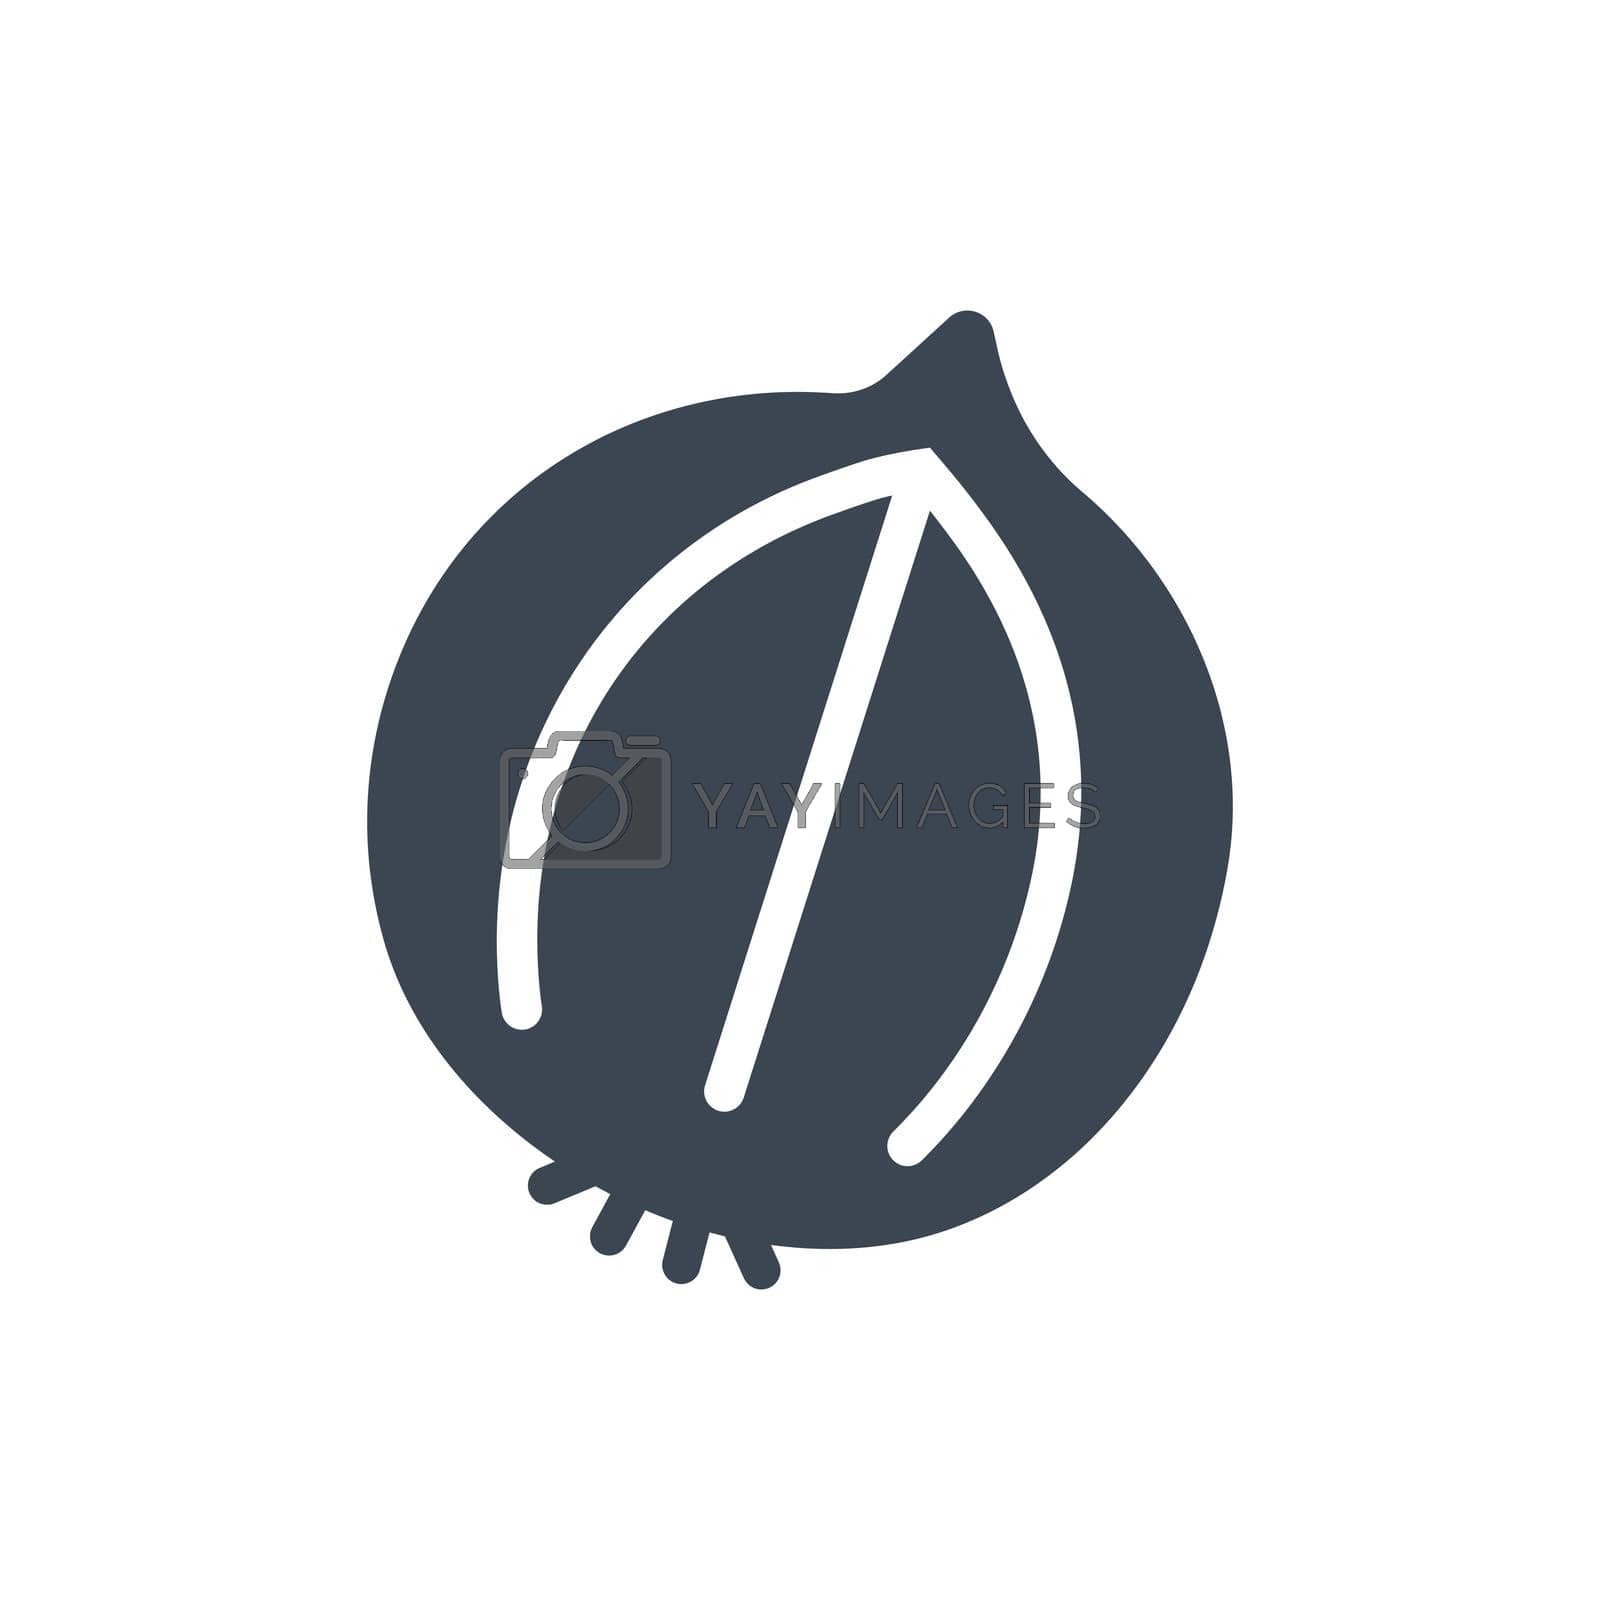 Royalty free image of Onion icon by delwar018